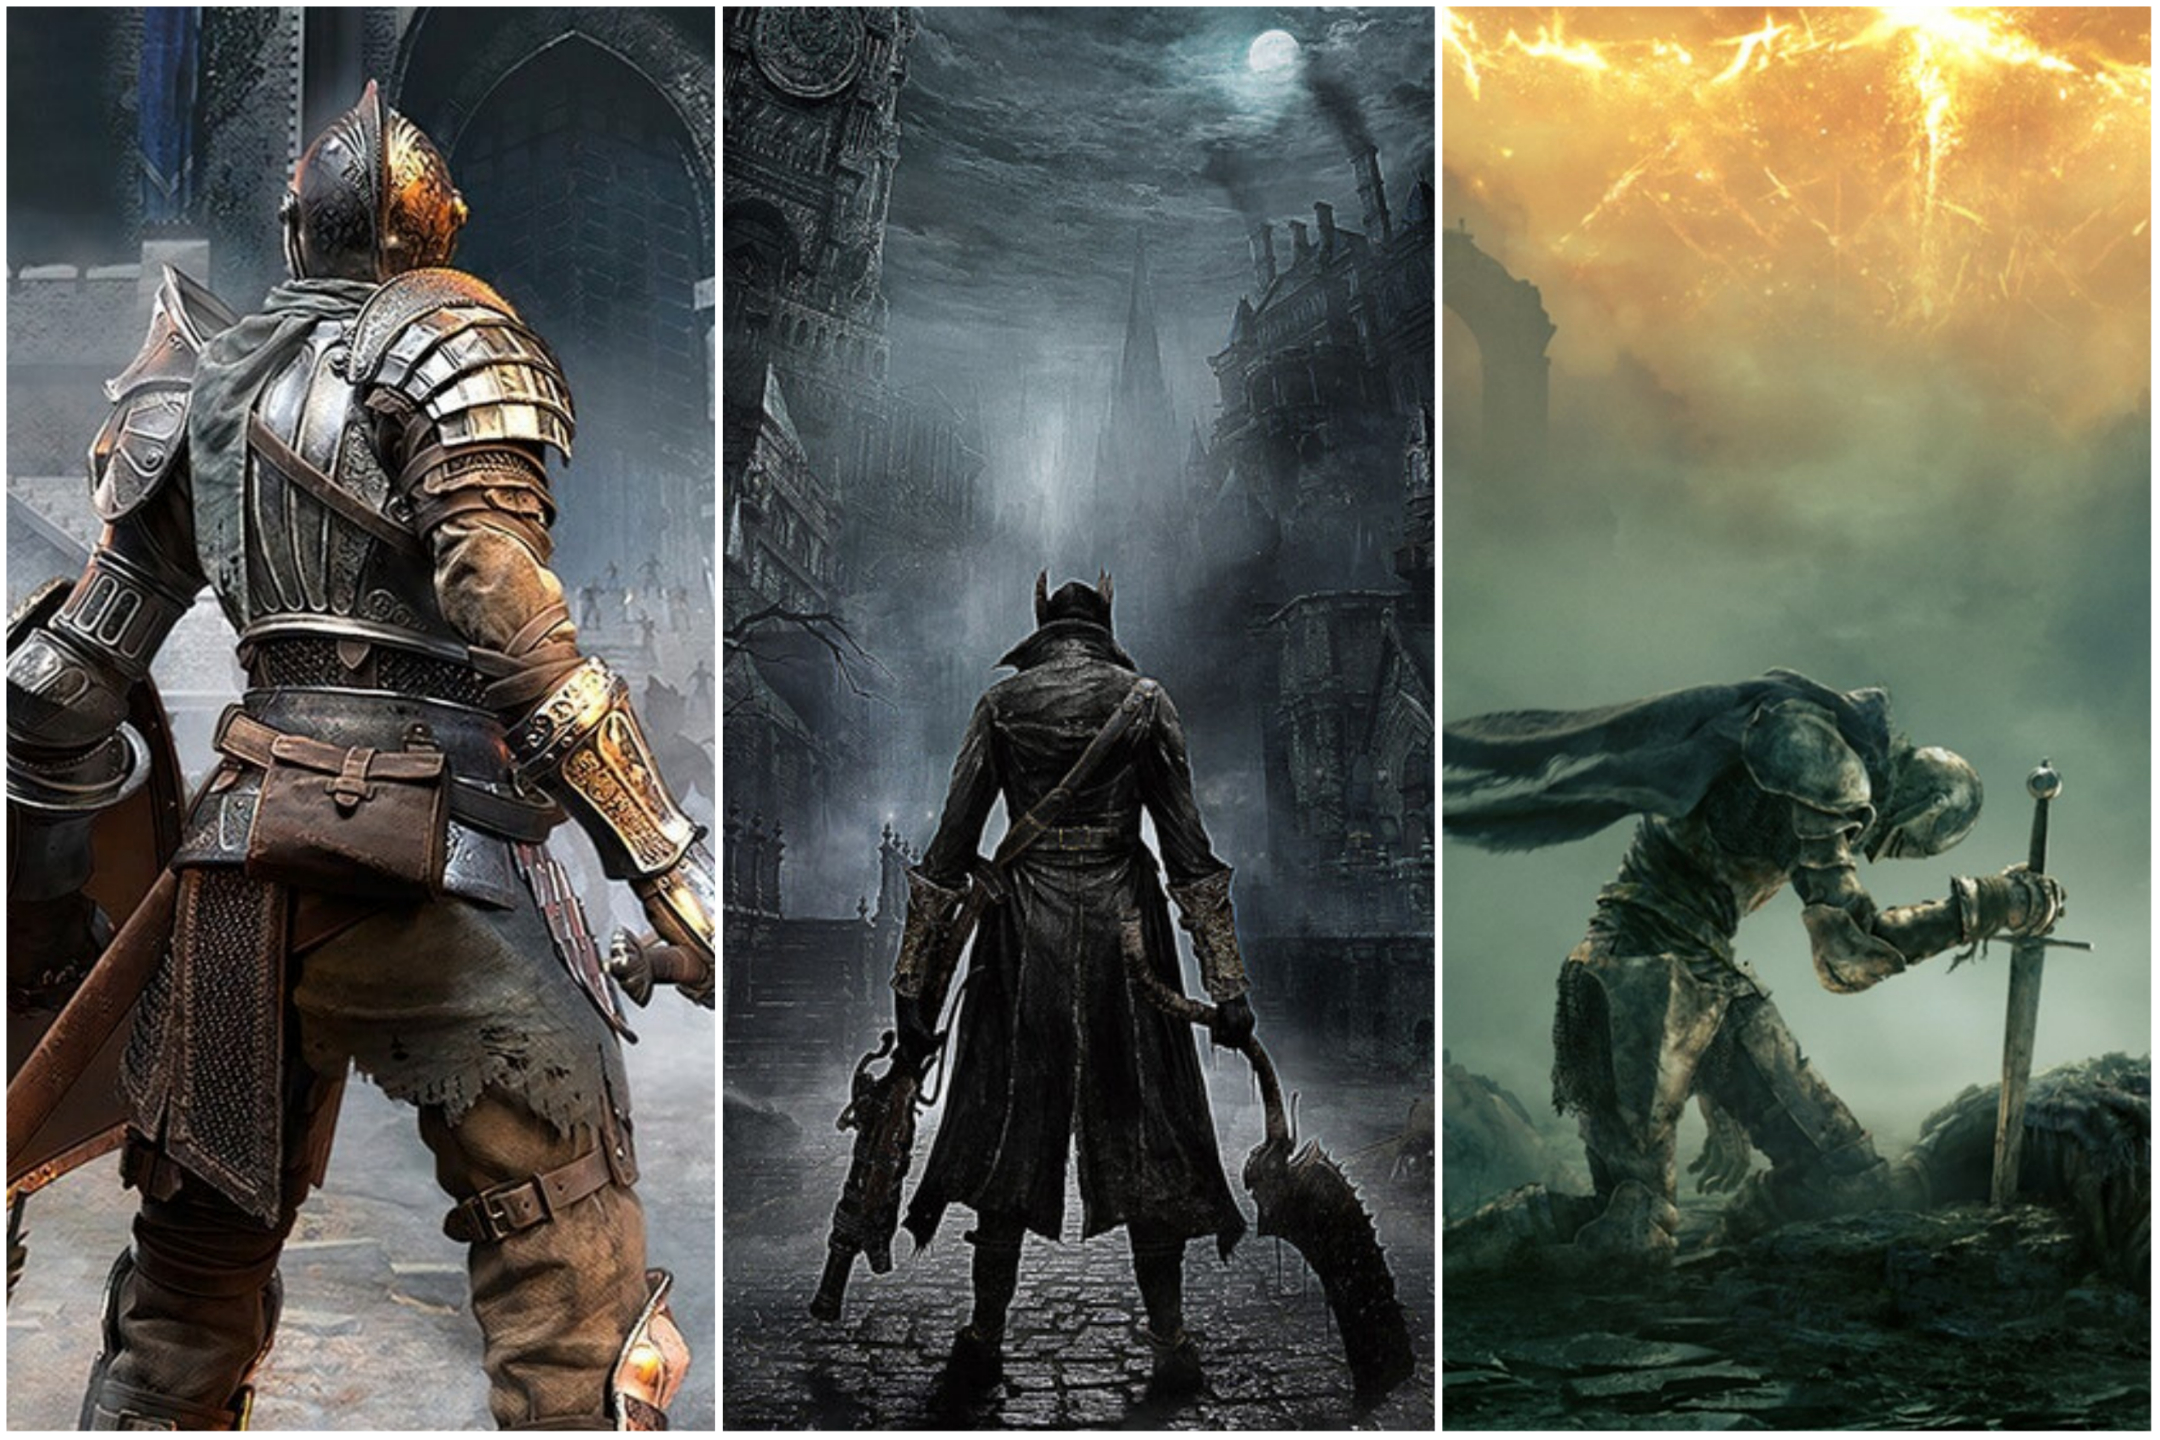 From Demon's Souls to Elden Ring: Every FromSoftware Soulsborne